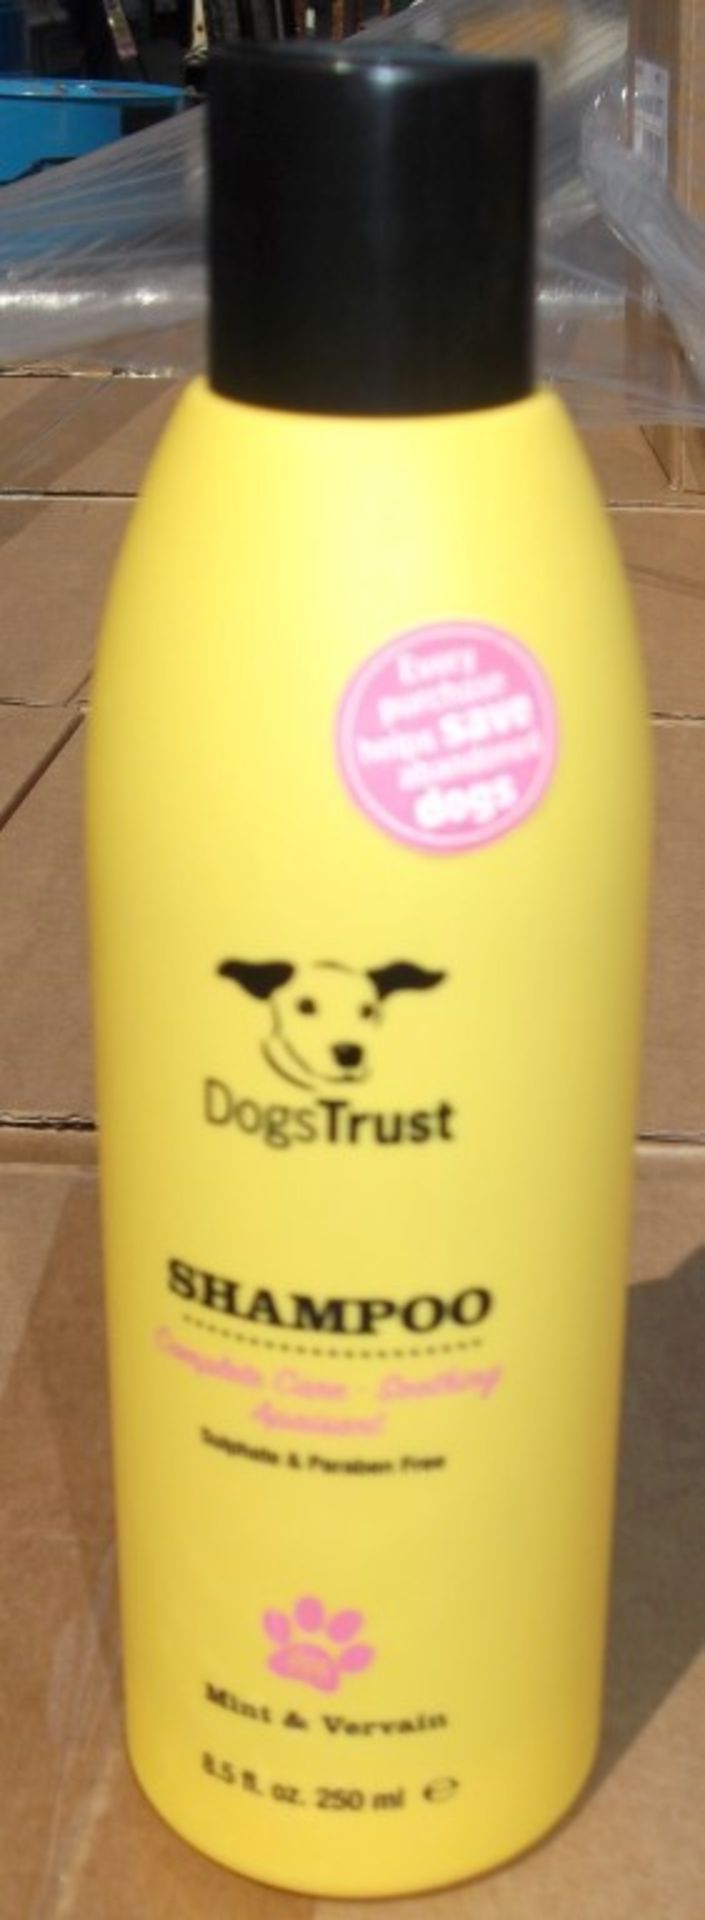 60 x Various Dogs Trust Shampoos and Conditioners - Brand New Stock - CL028 - Includes No Tears, - Image 3 of 16